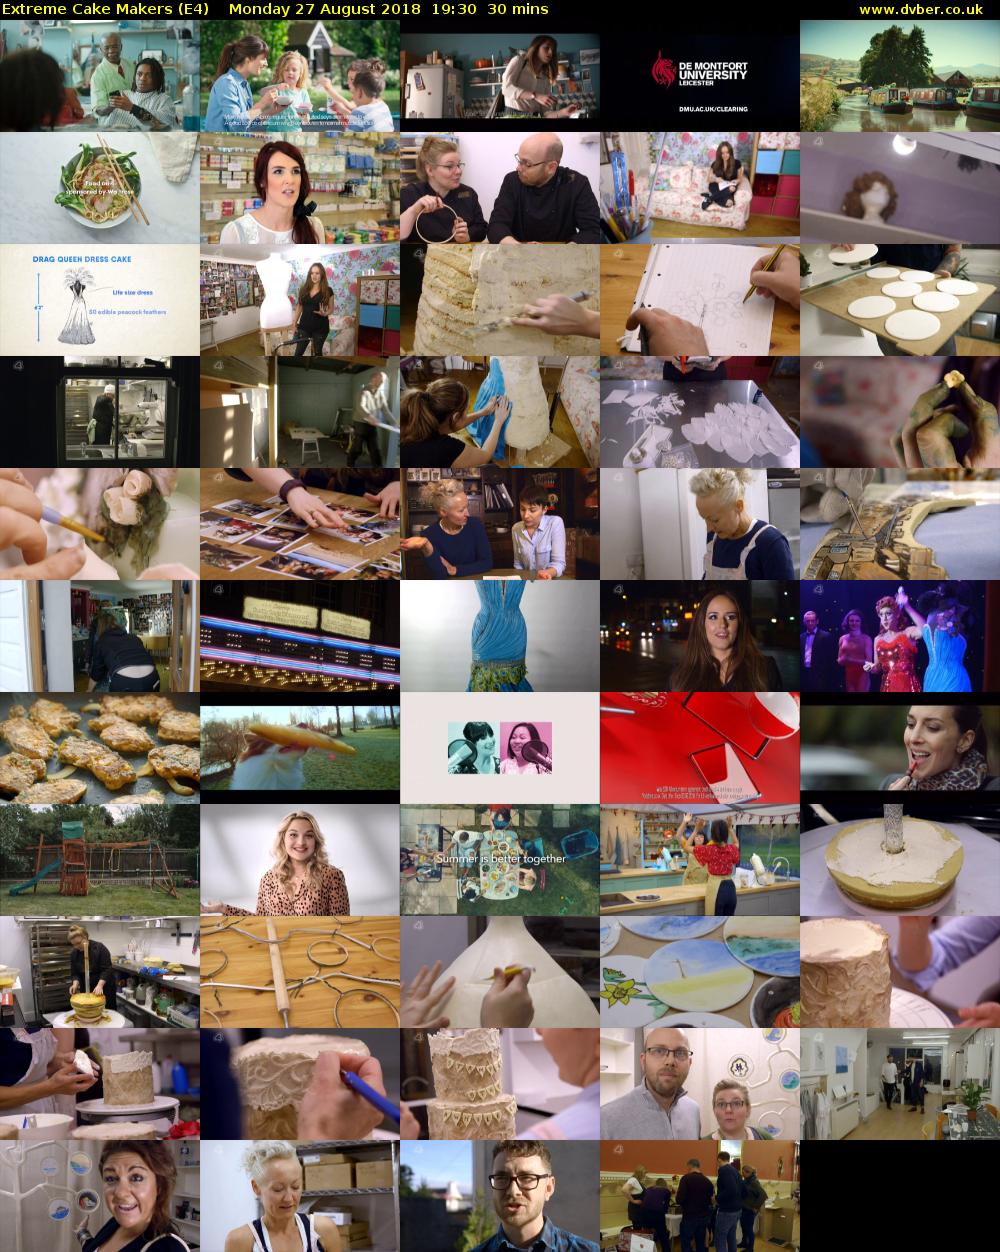 Extreme Cake Makers (E4) Monday 27 August 2018 19:30 - 20:00